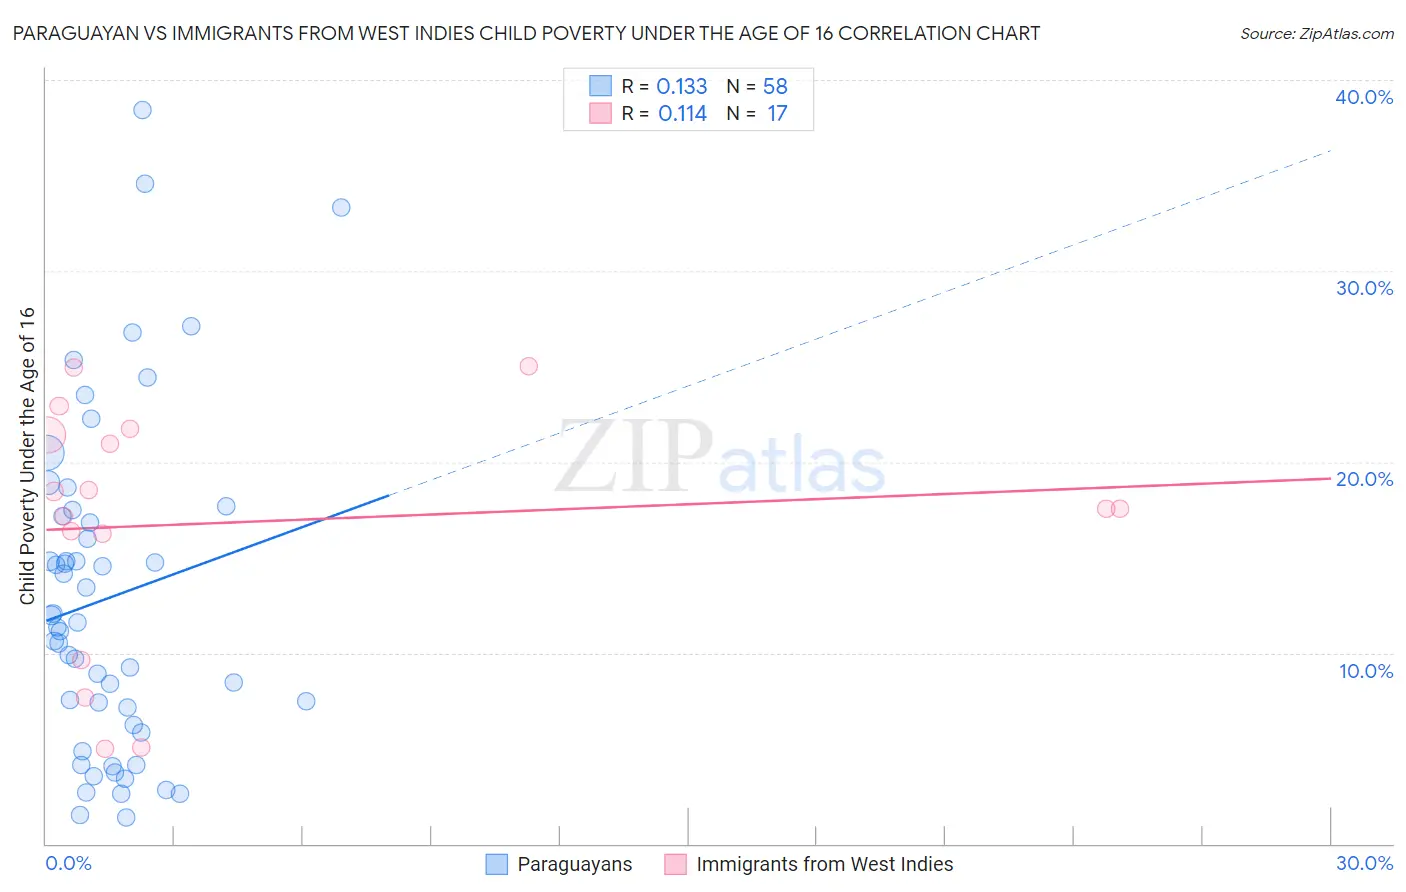 Paraguayan vs Immigrants from West Indies Child Poverty Under the Age of 16